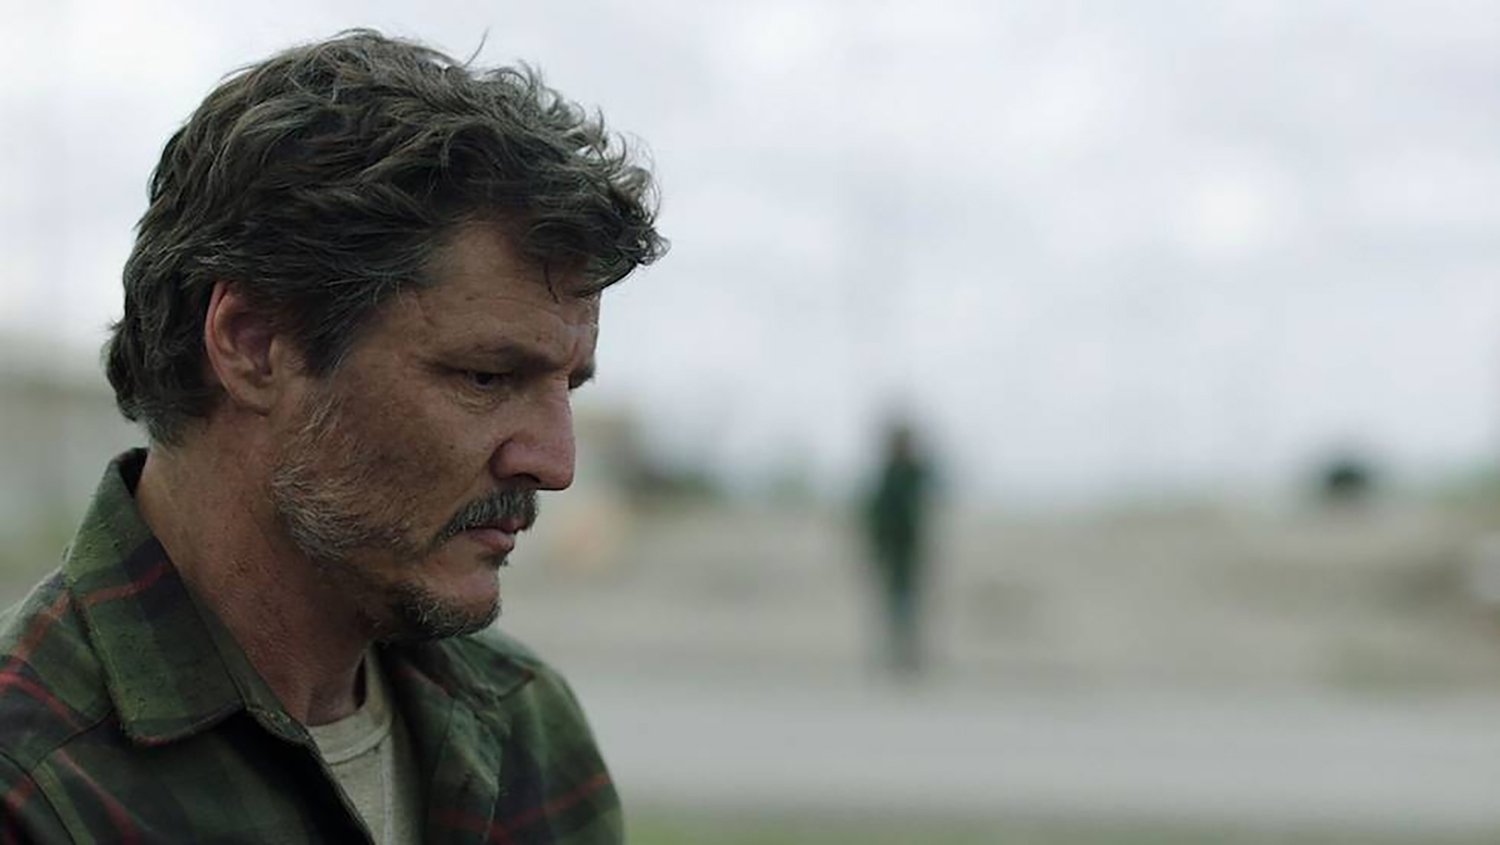 A side angle of Pedro Pascal as Joel looking down and somber in The Last of Us Episode 5.